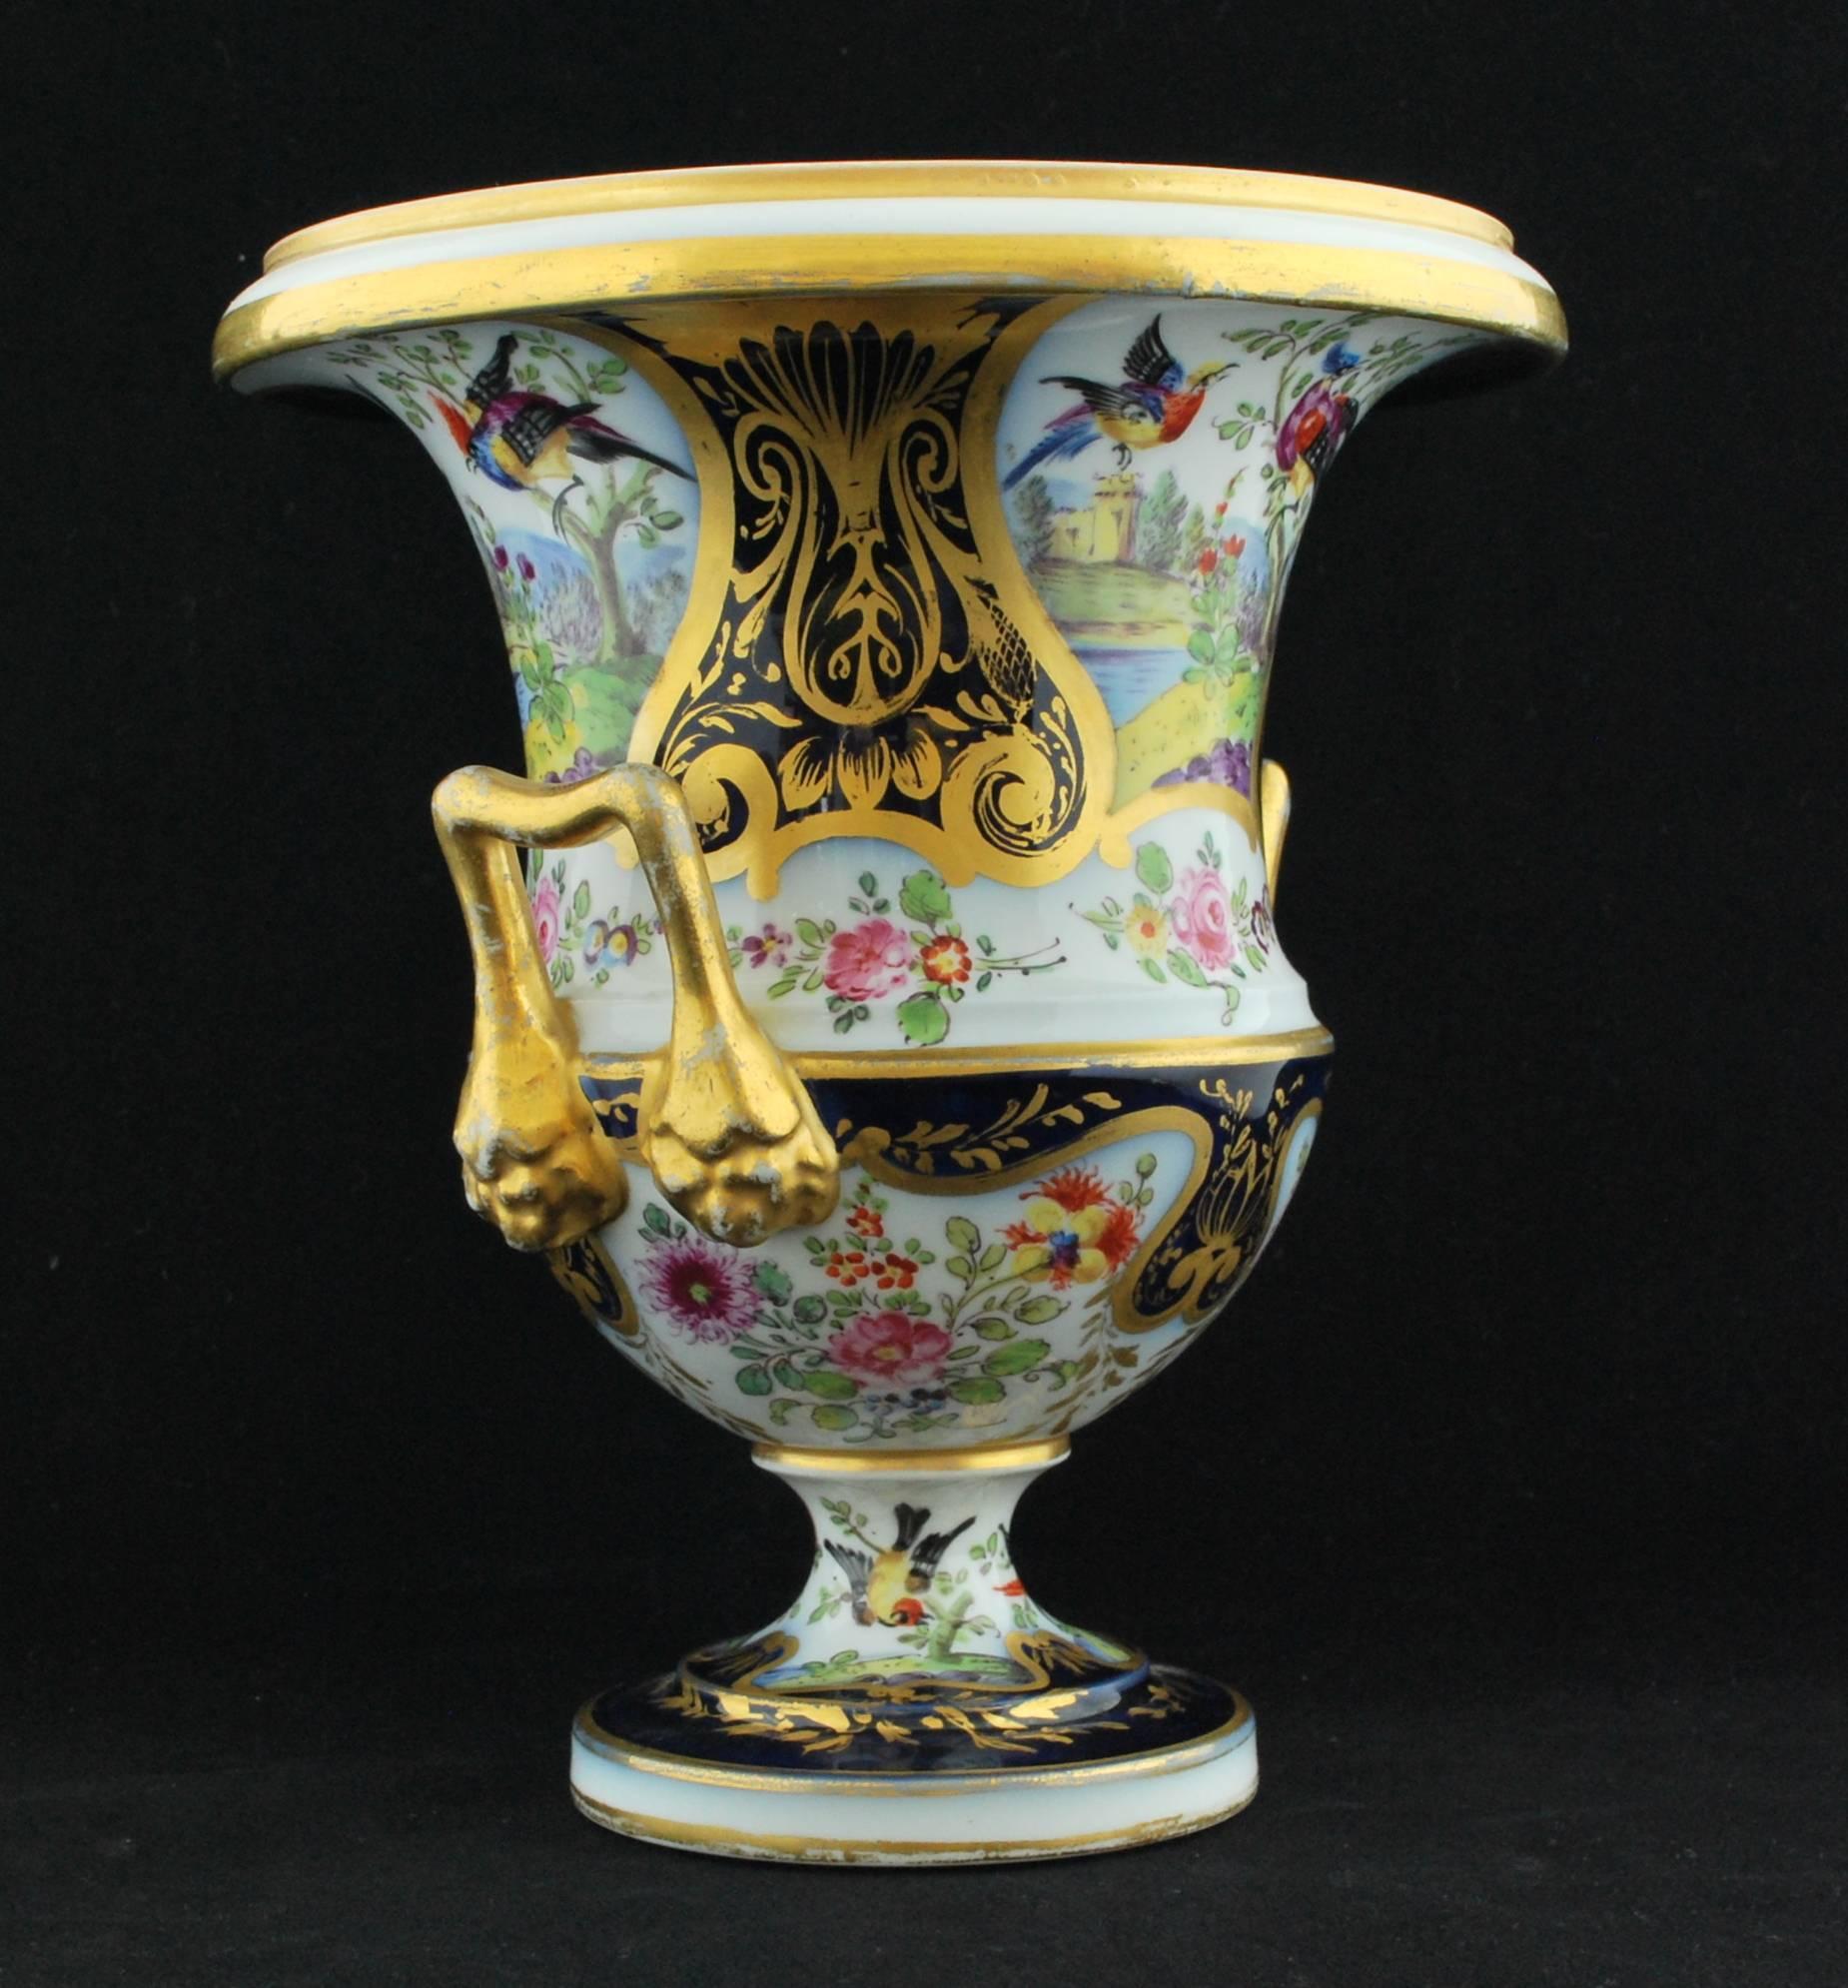 Neoclassical Pair of Campana Vases, Dublin Decorated, Derby Porcelain Works, circa 1810